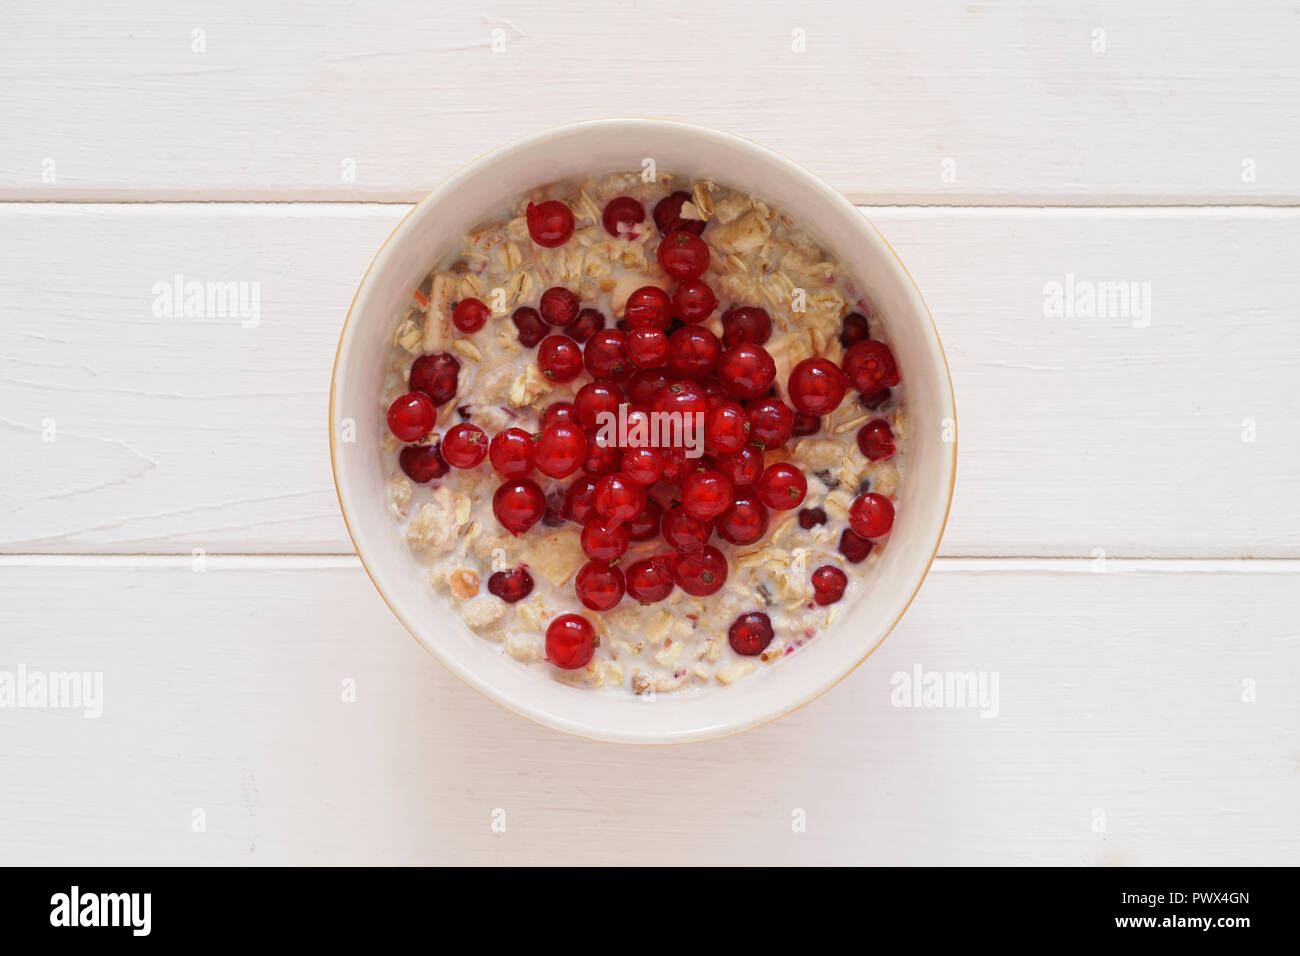 overhead view of breakfast bowl muesli with fresh redcurrant berries on white wooden table Stock Photo